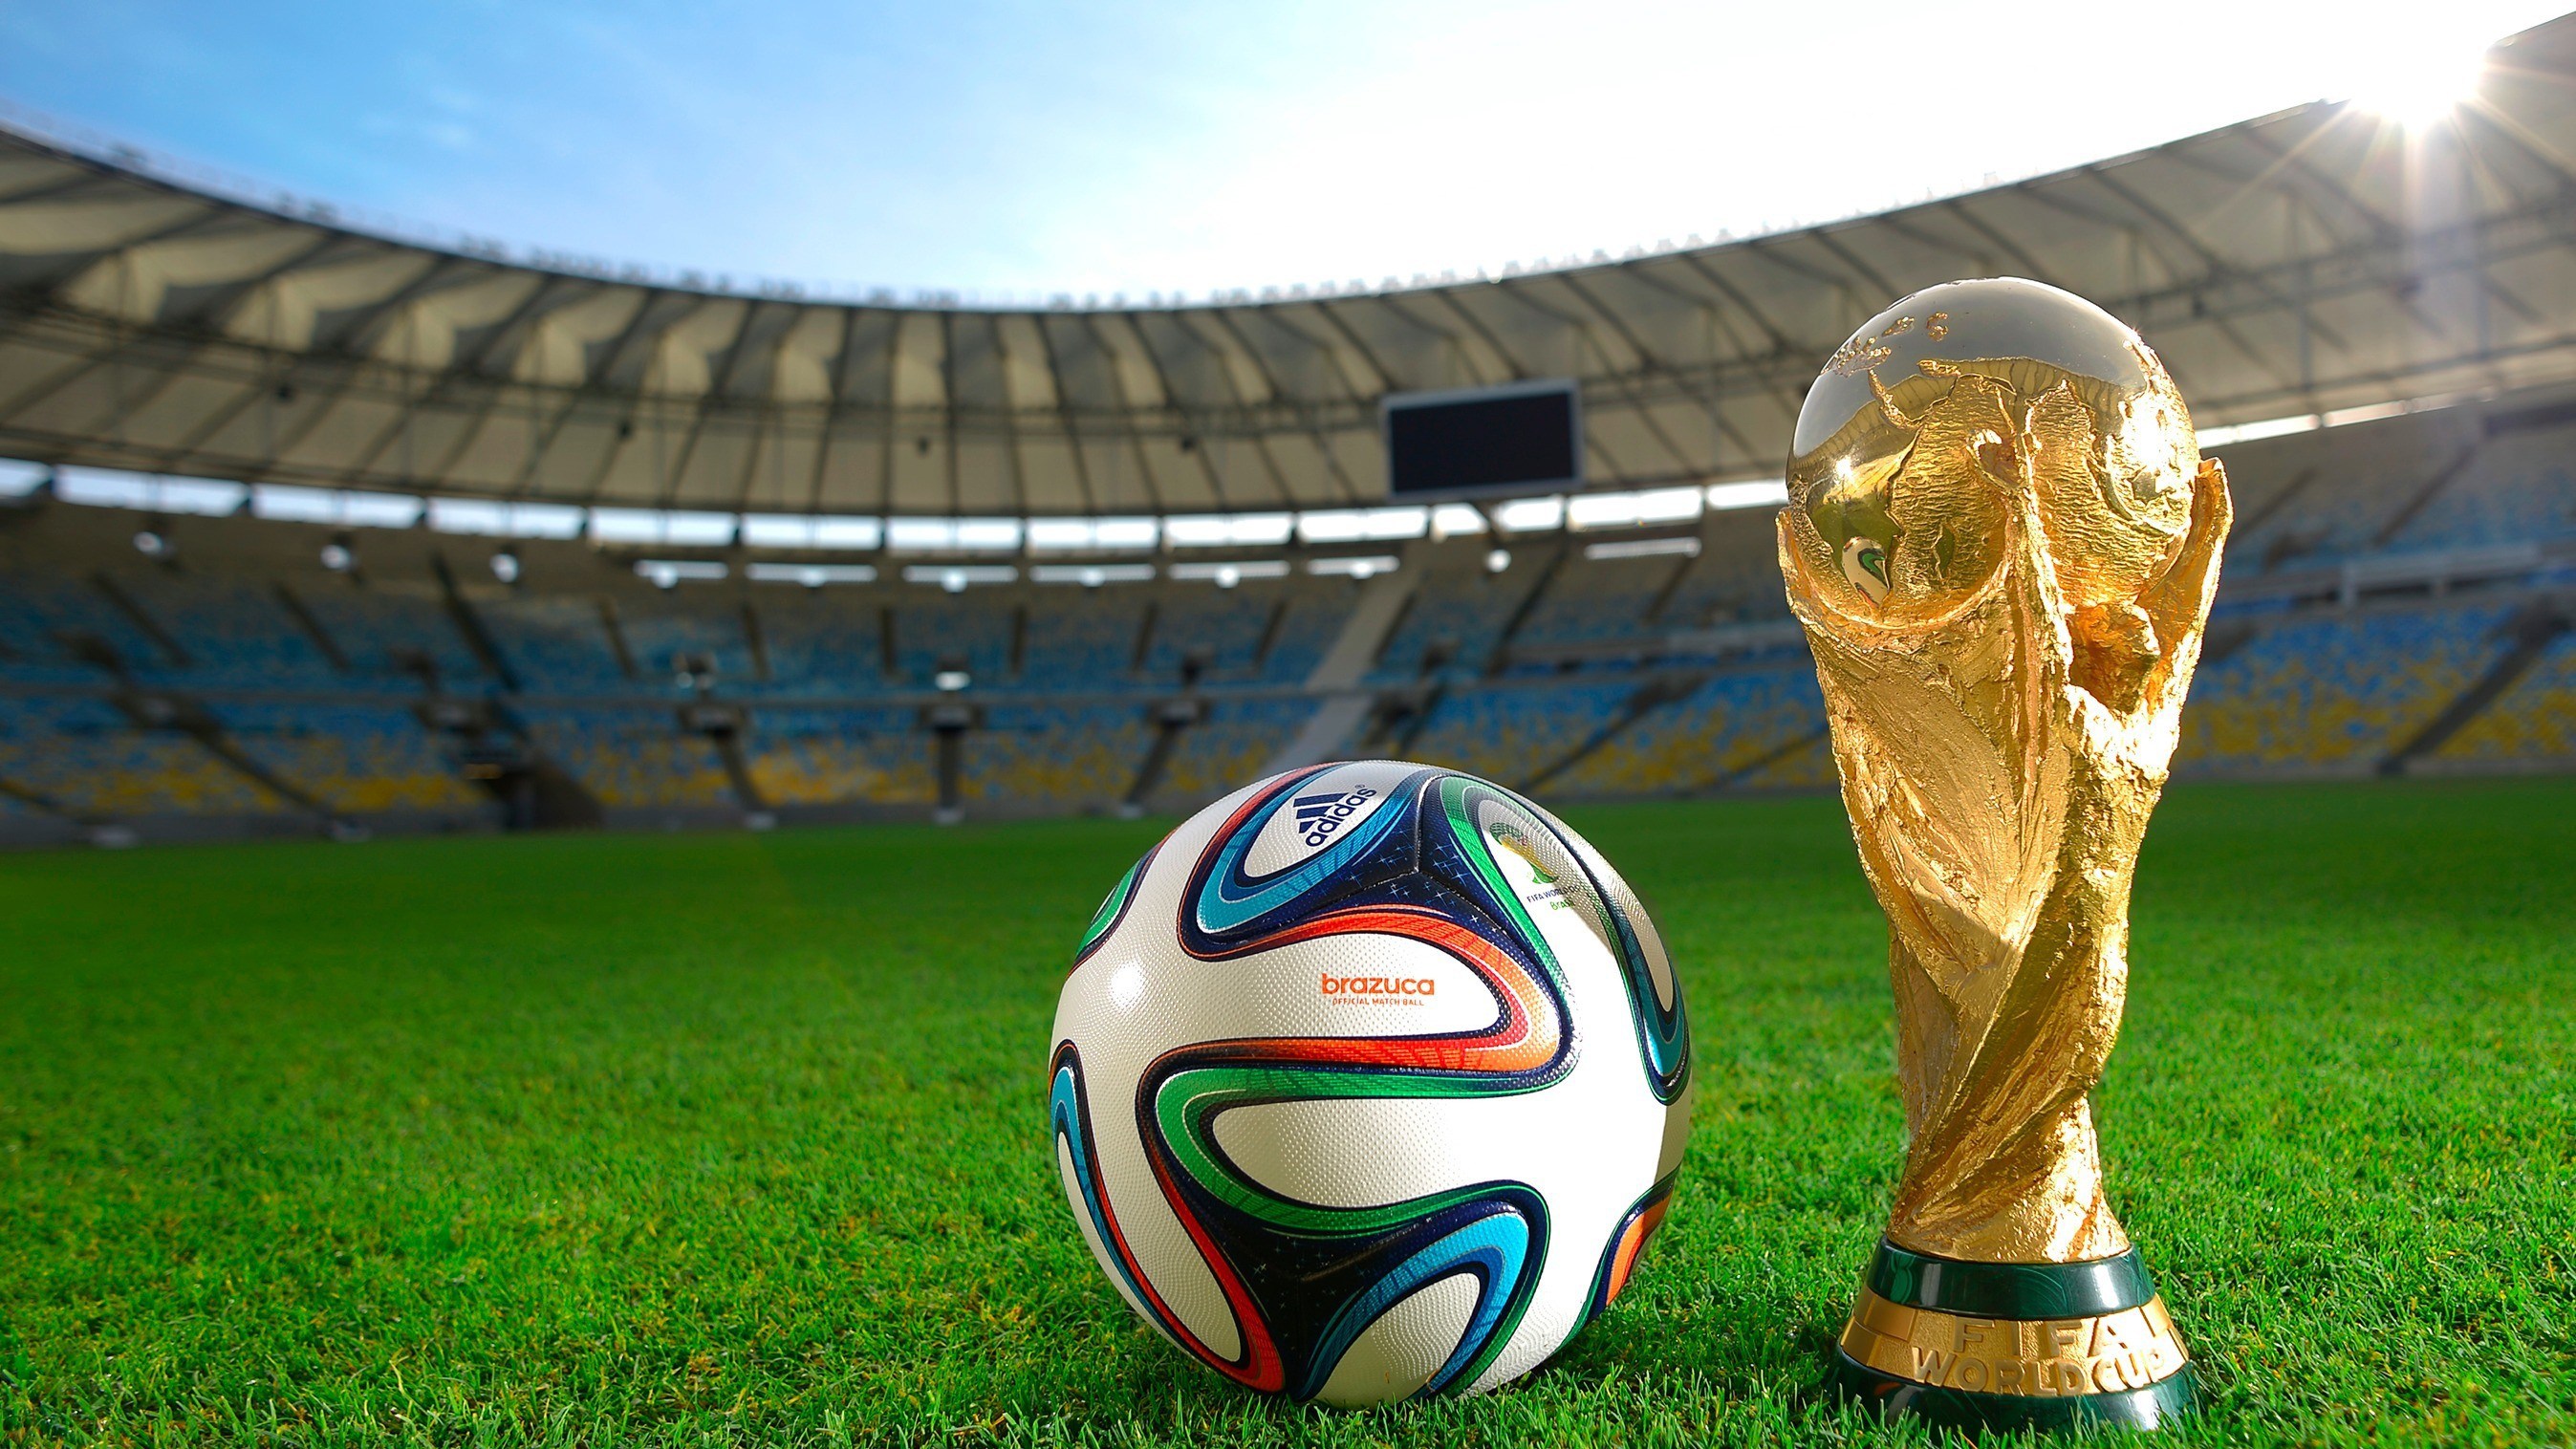 Here's how to follow the 2014 FIFA World Cup on Social Media